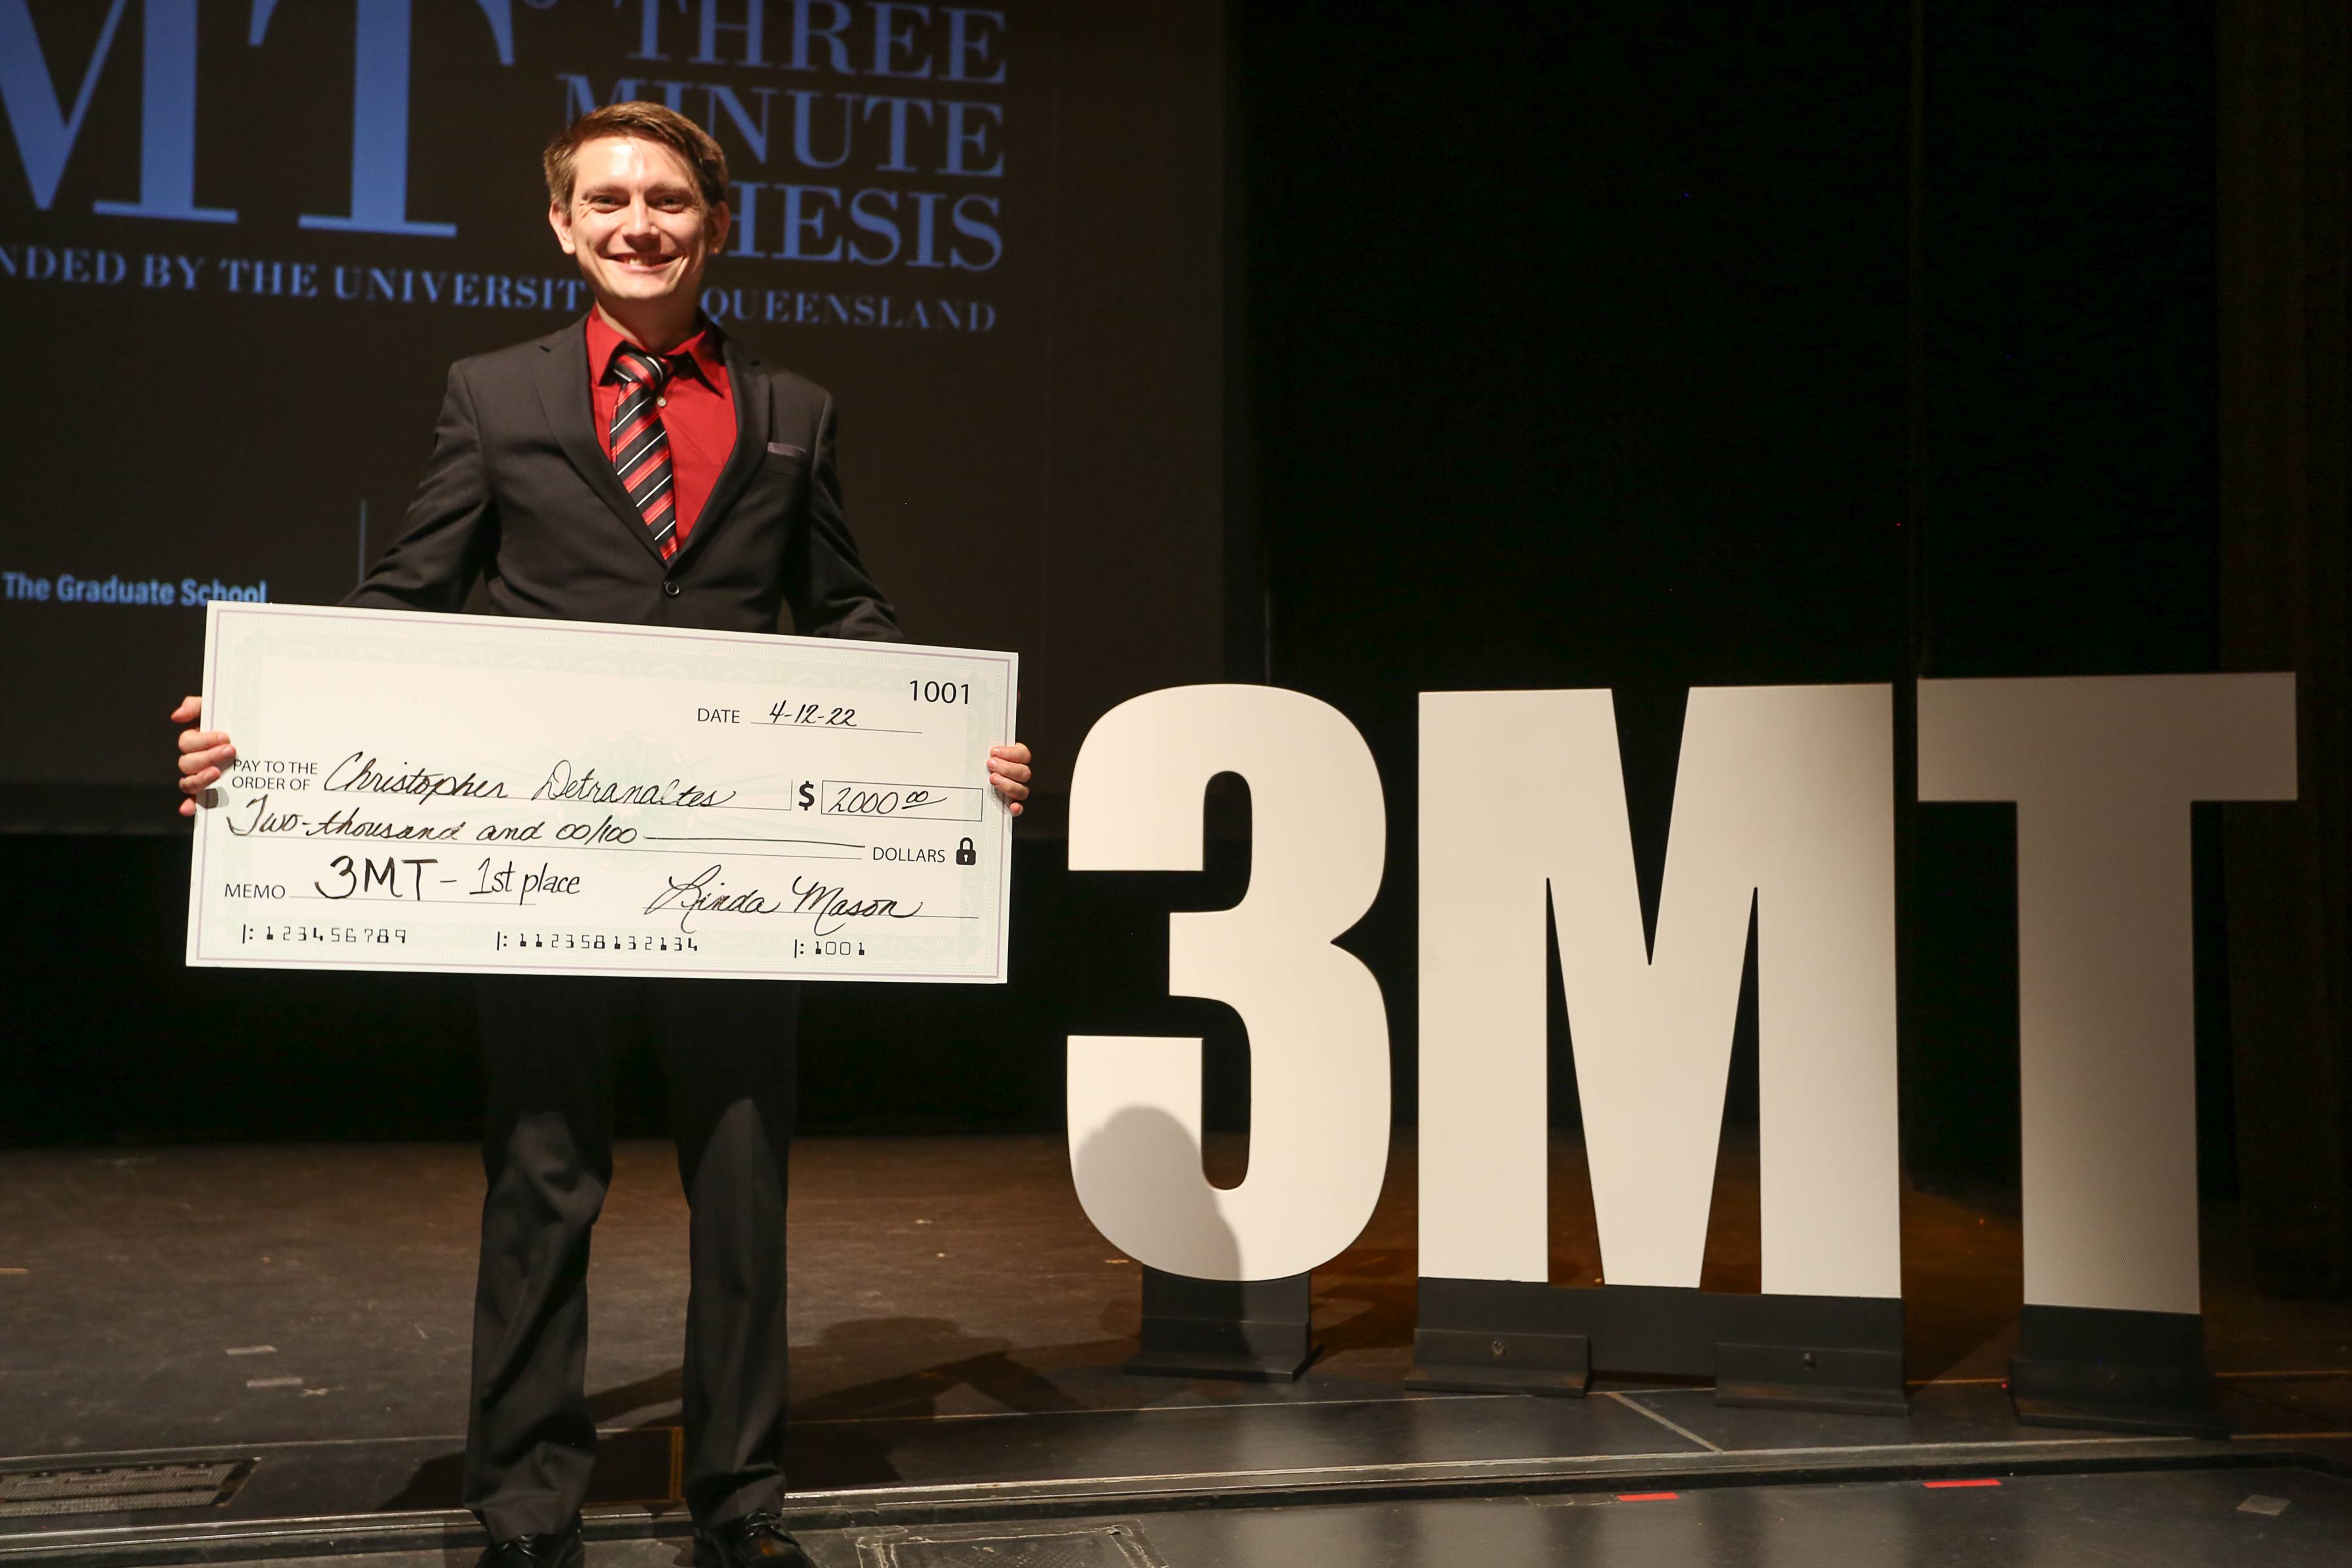 three minute thesis purdue